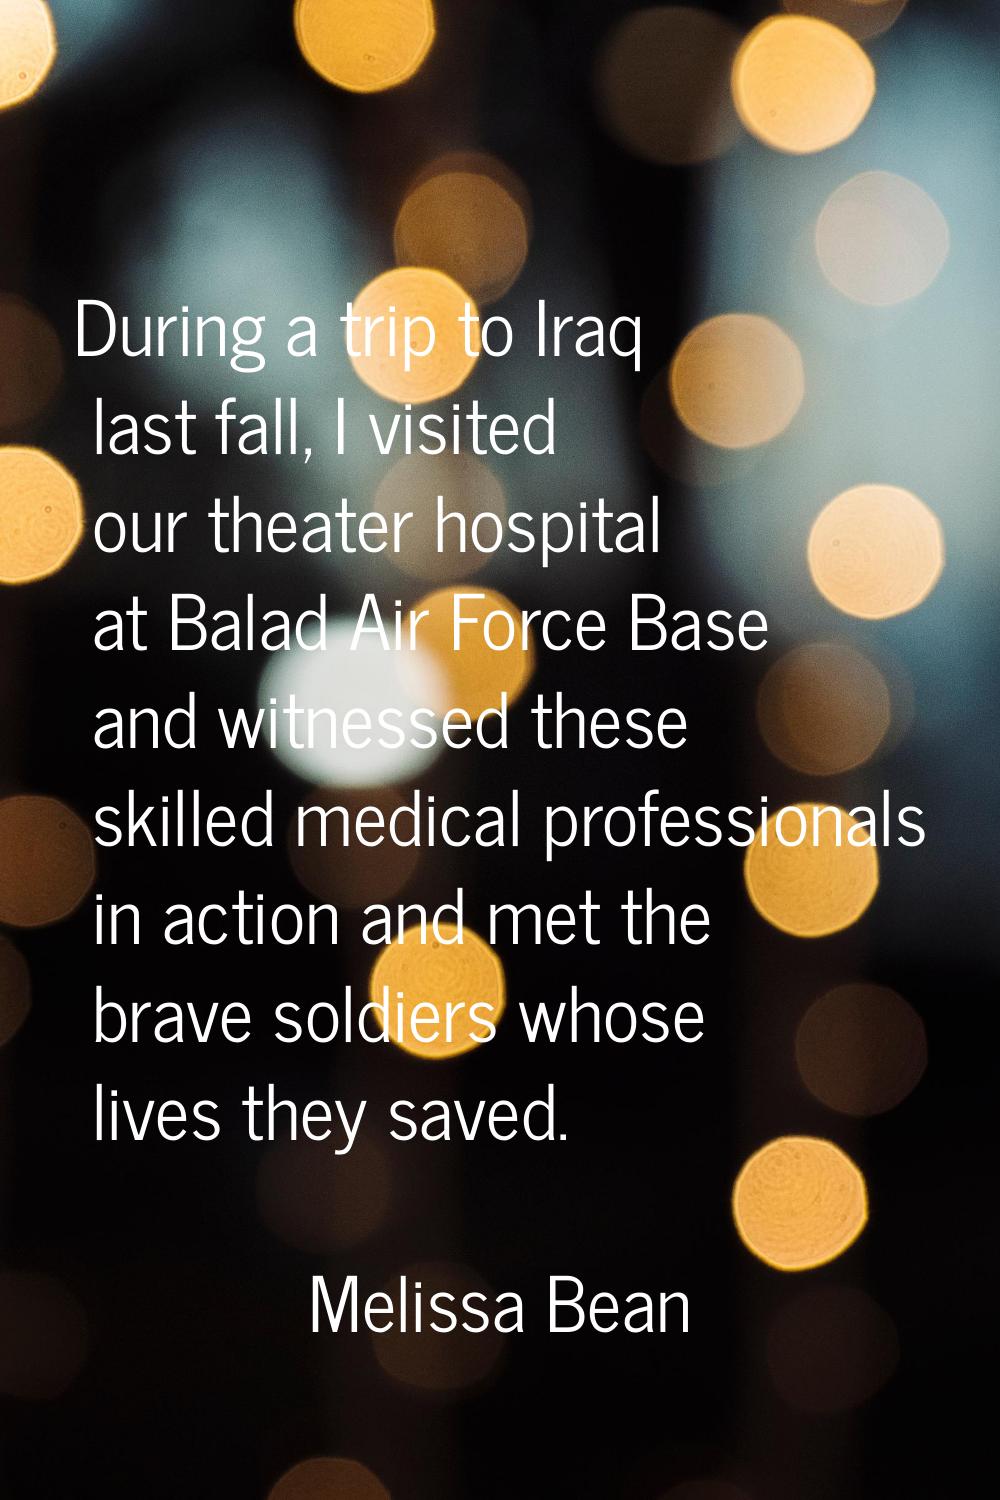 During a trip to Iraq last fall, I visited our theater hospital at Balad Air Force Base and witness